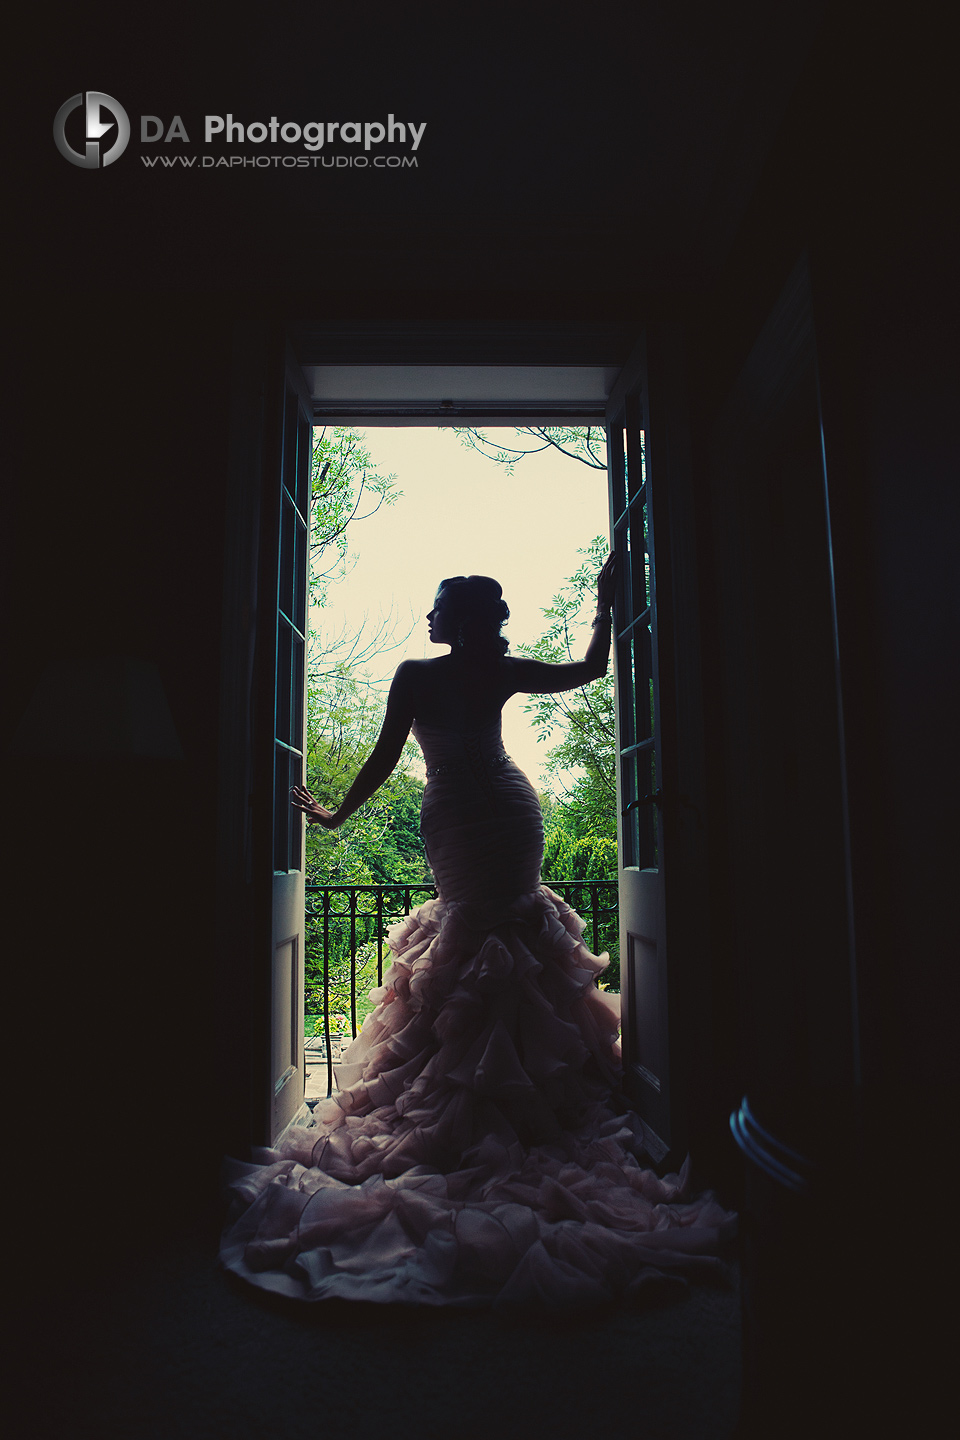 The bride to be silhouette - Engagement - wedding photographer